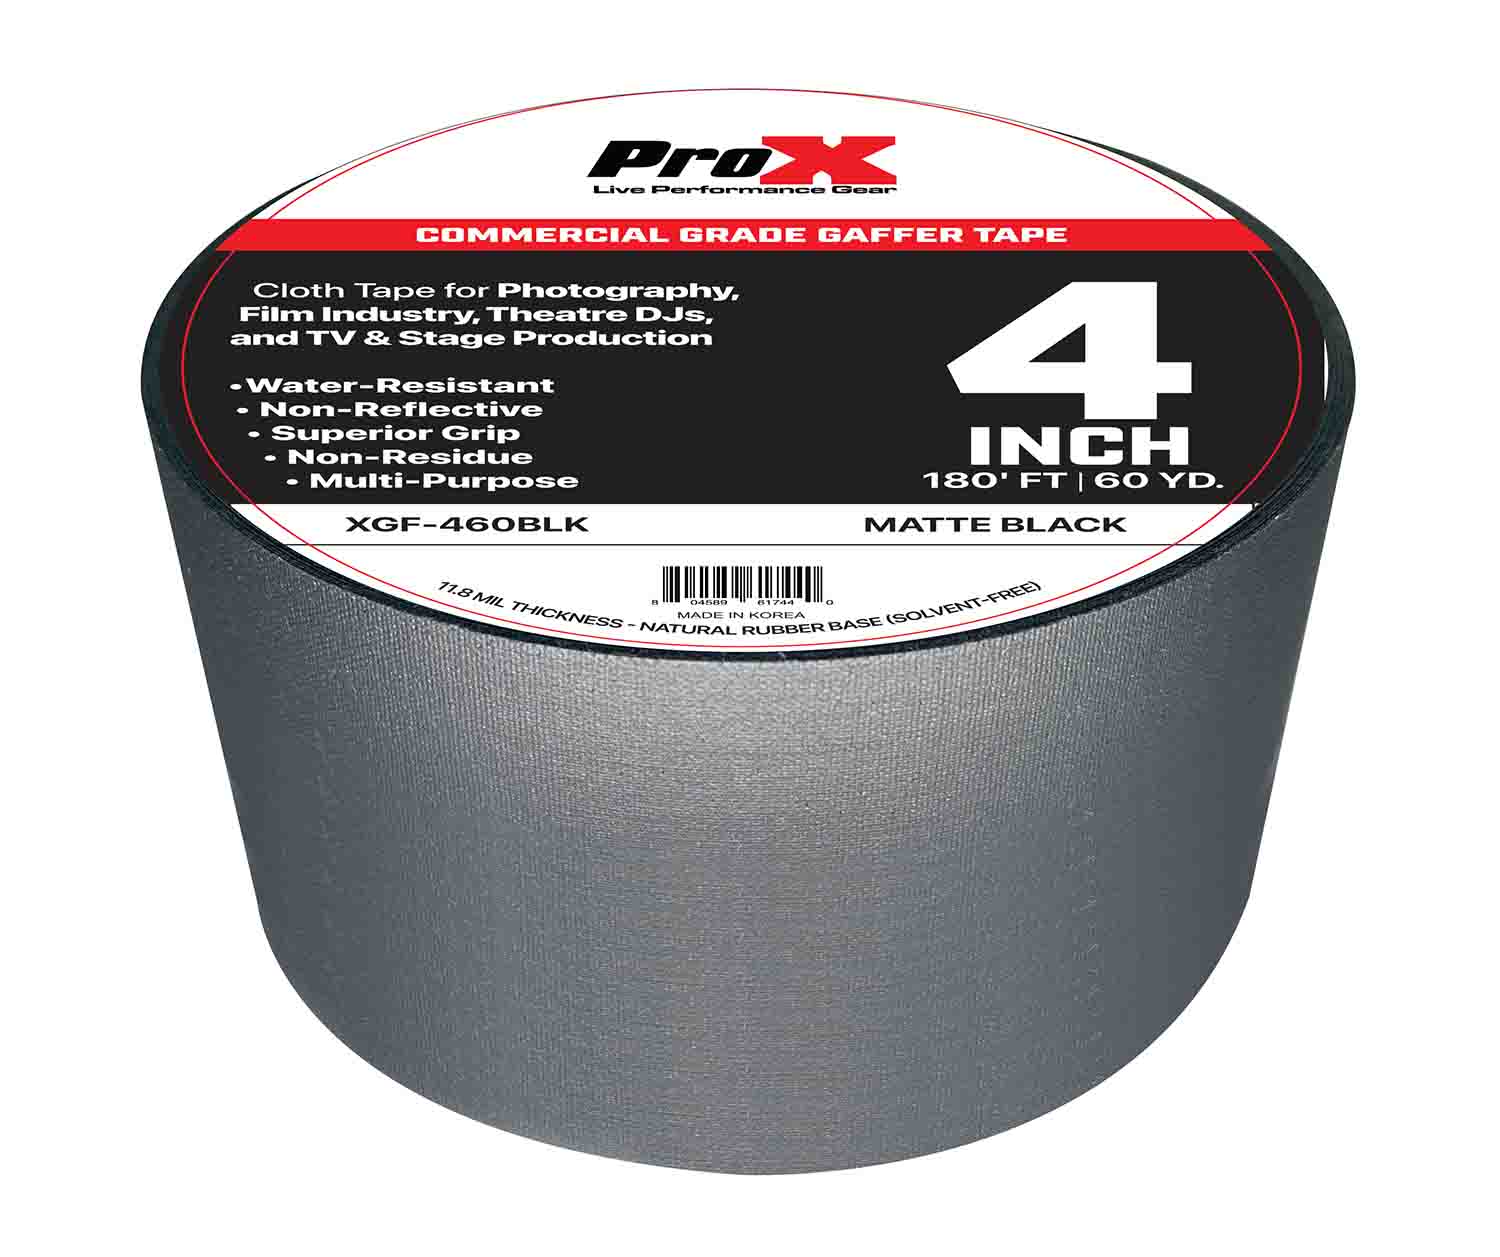 ProX XGF-460BLK, 4-inch 60YD Matte Commercial Grade Gaffer Tape Pros Choice Non-Residue - Black - Hollywood DJ